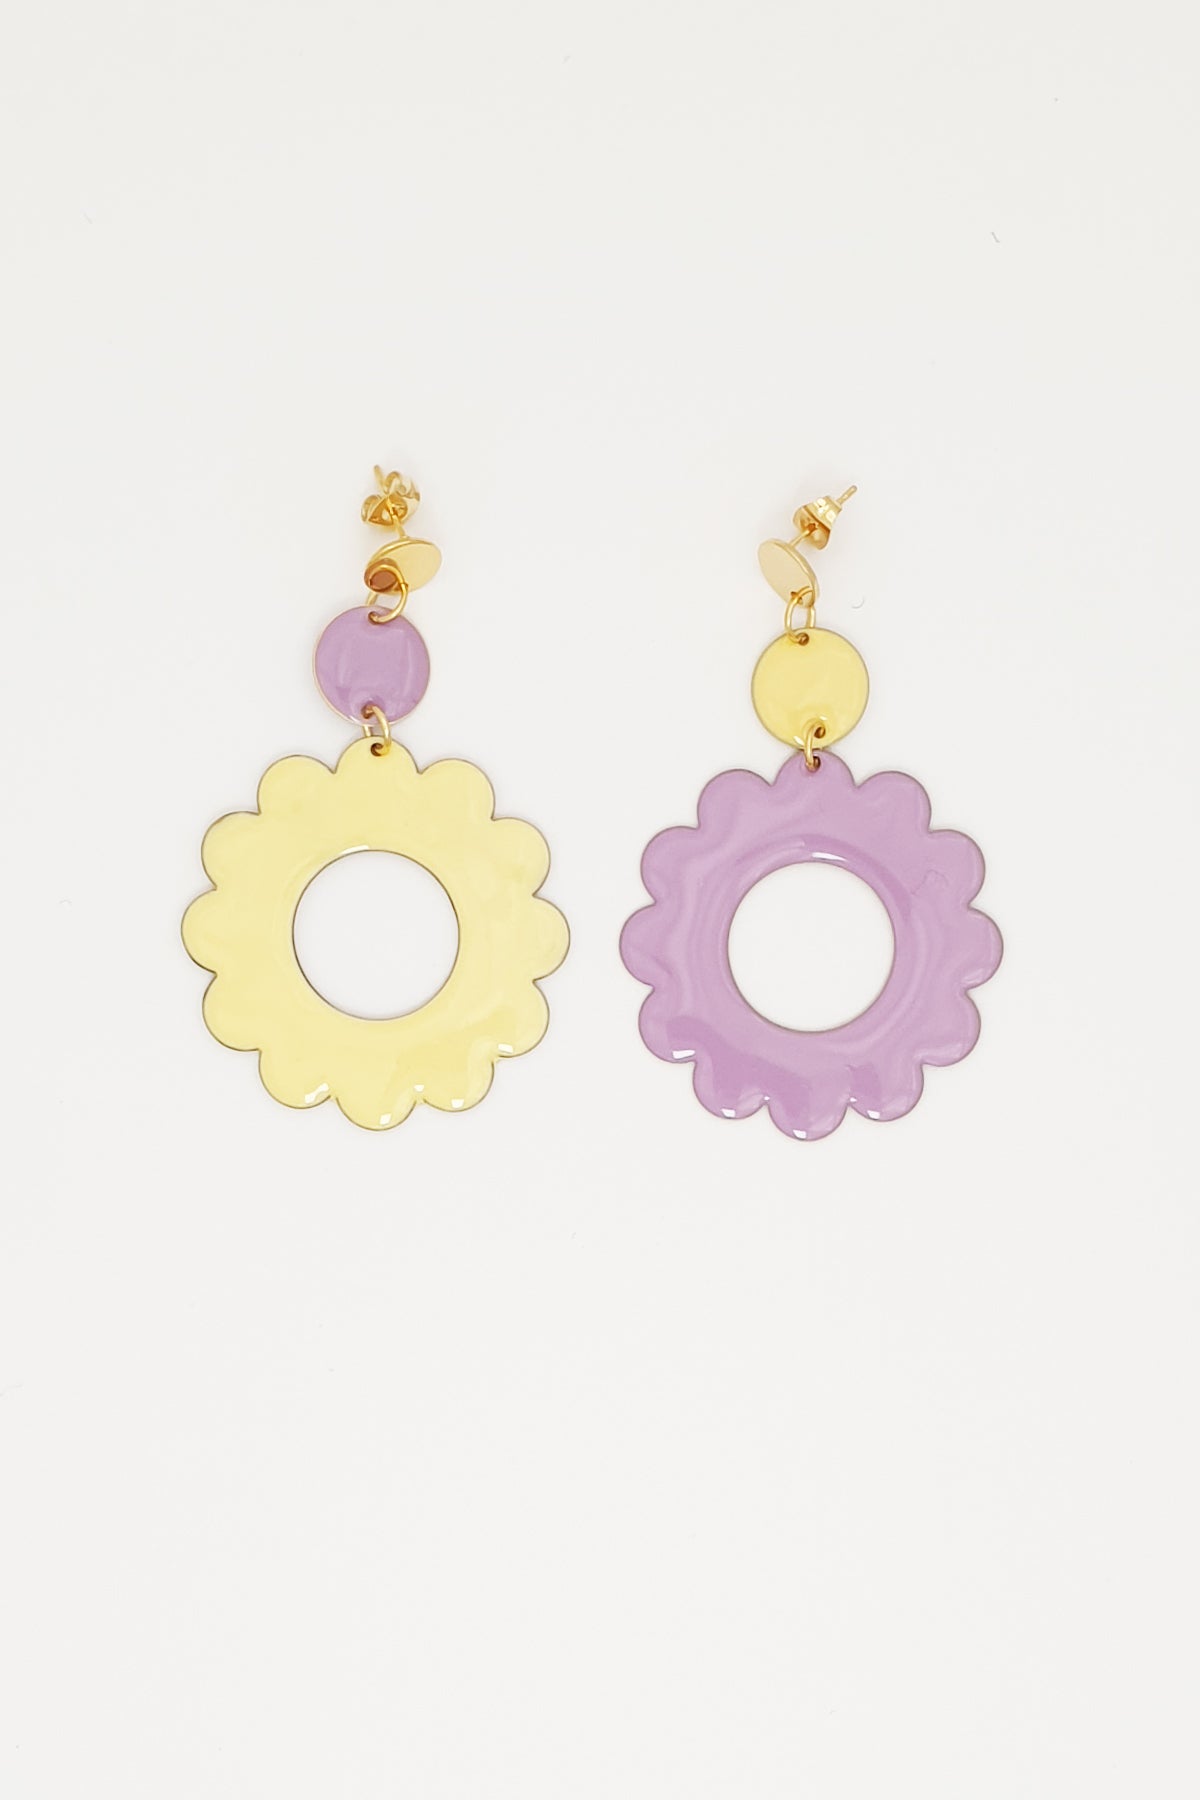 A pair of stud dangle earrings lay on white background. The left earring features a lilac enamel dot connected to a larger enamel lemon flower. The right earring is flipped and features an enamel lemon dot connected to a larger lilac enamel flower 